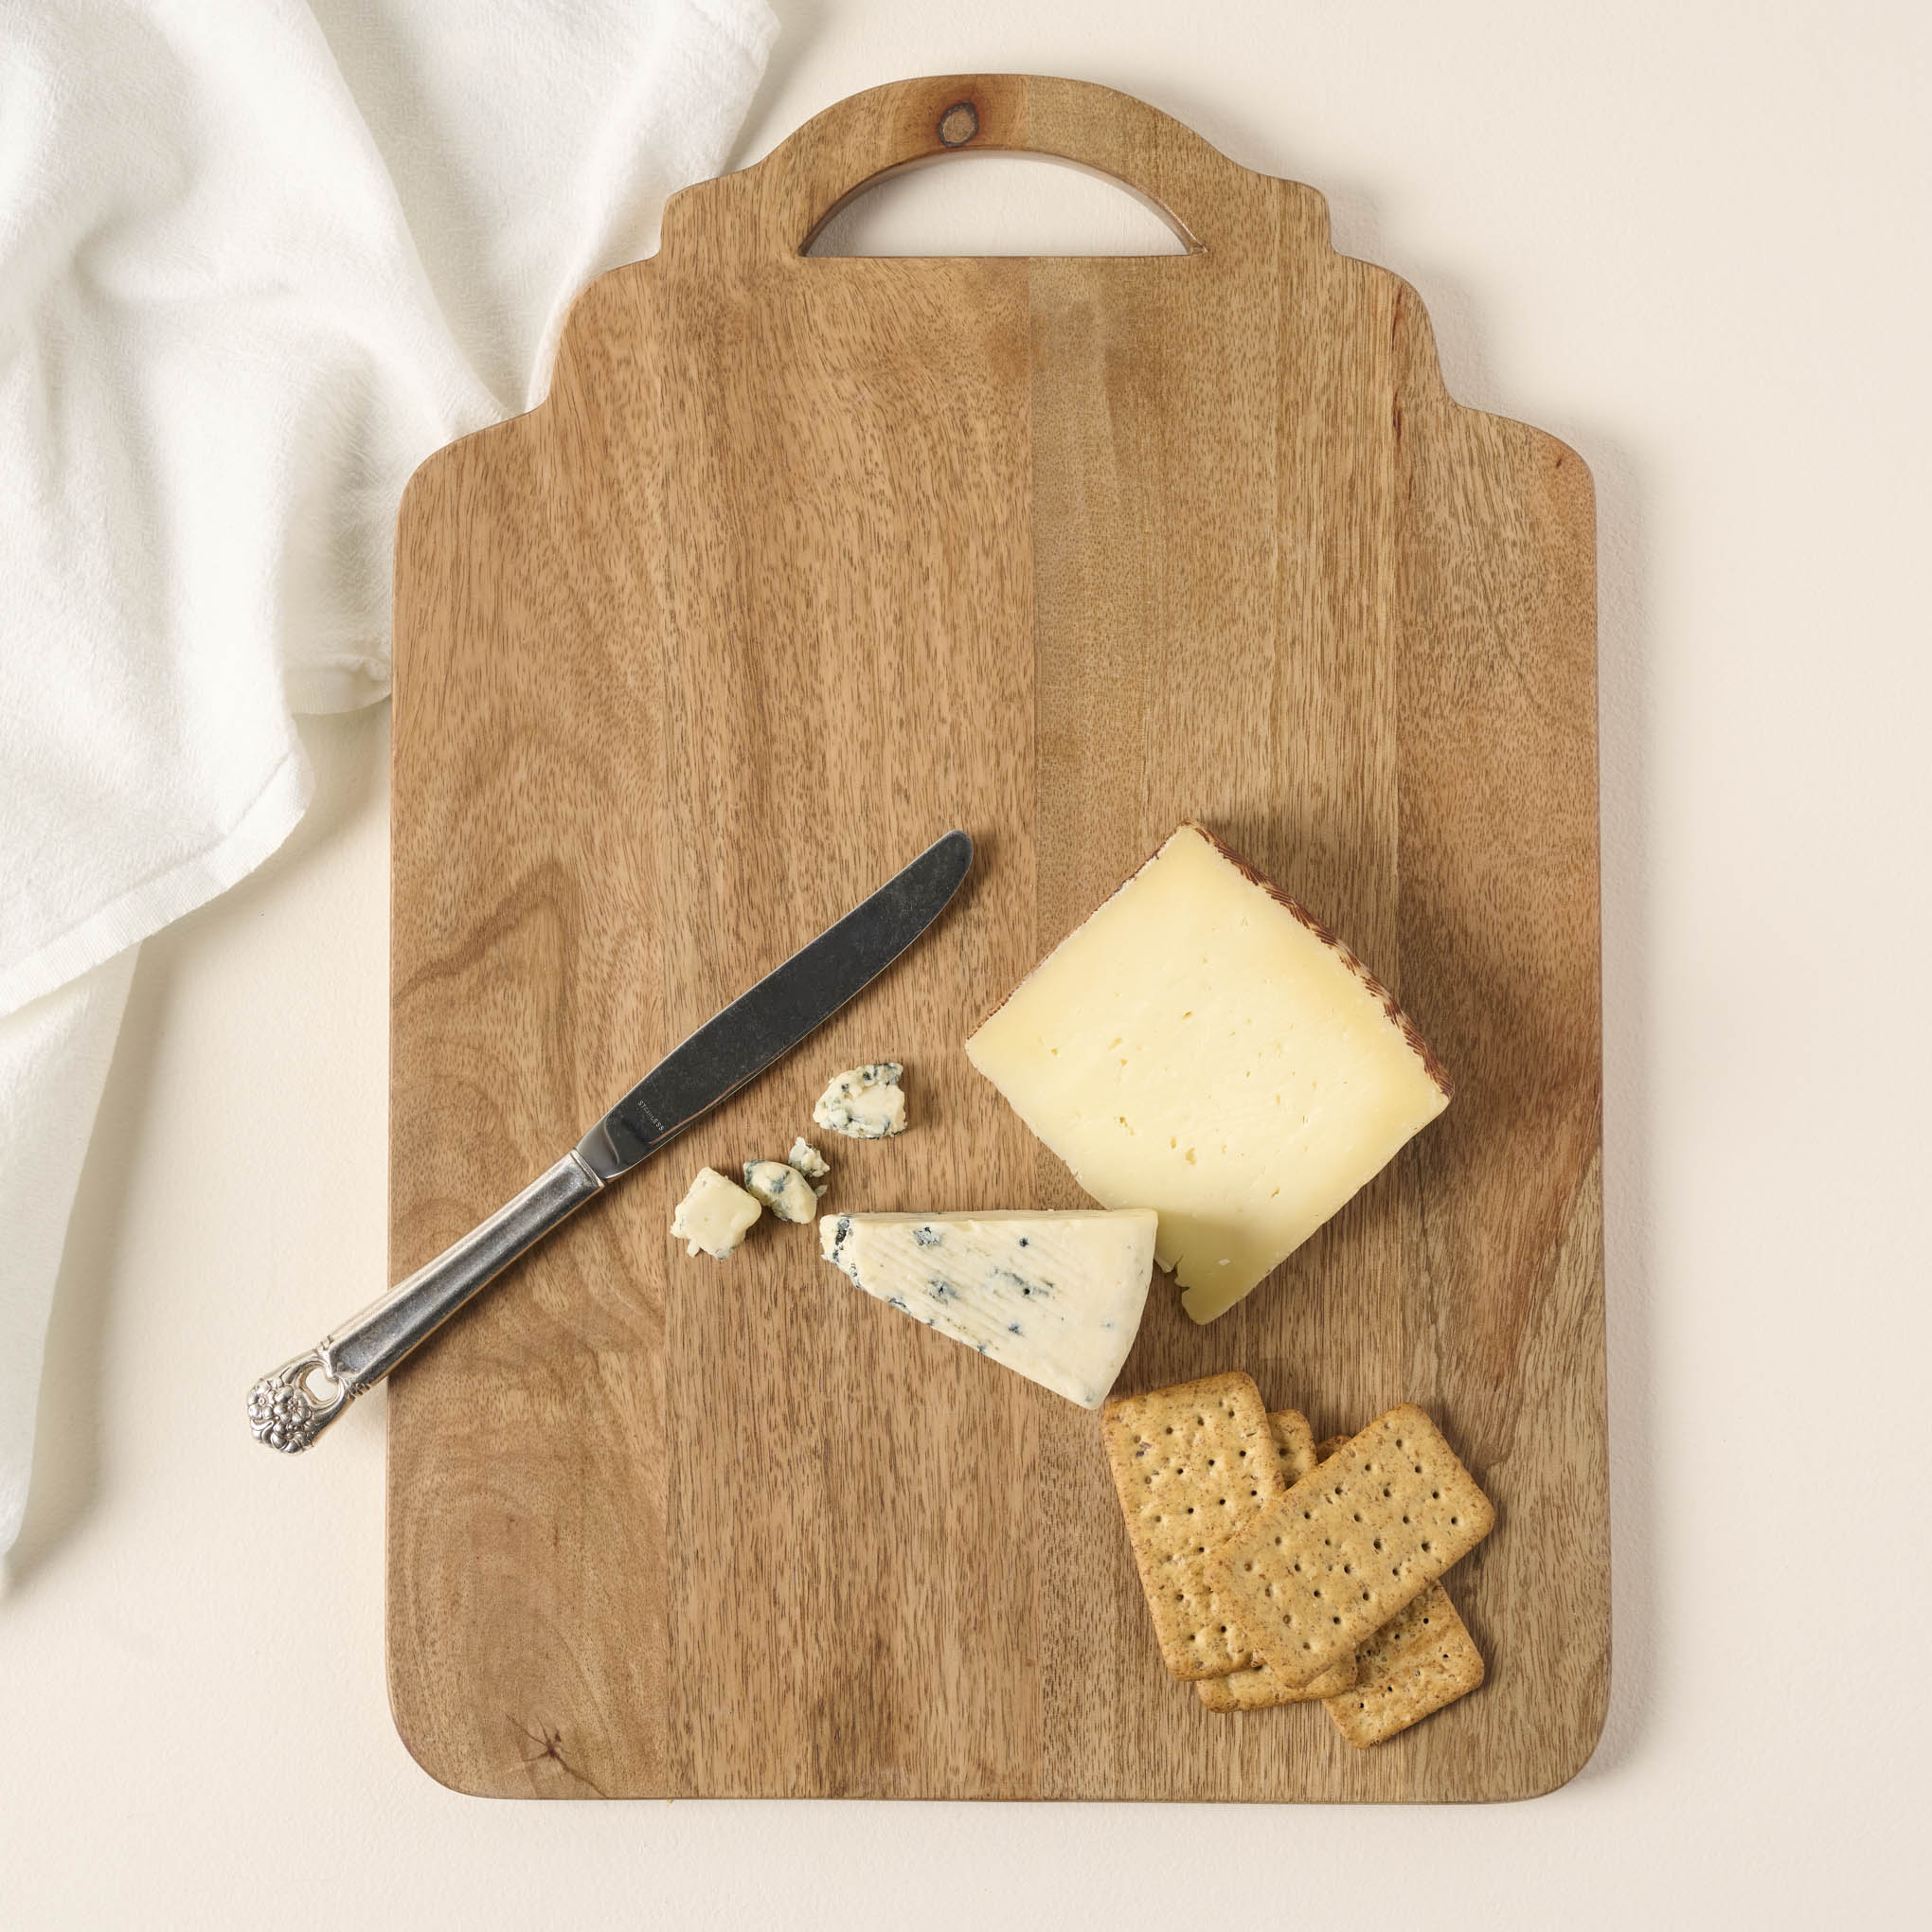 Ells Wooden Serving Board with cheese, crackers, and a butter knife on it